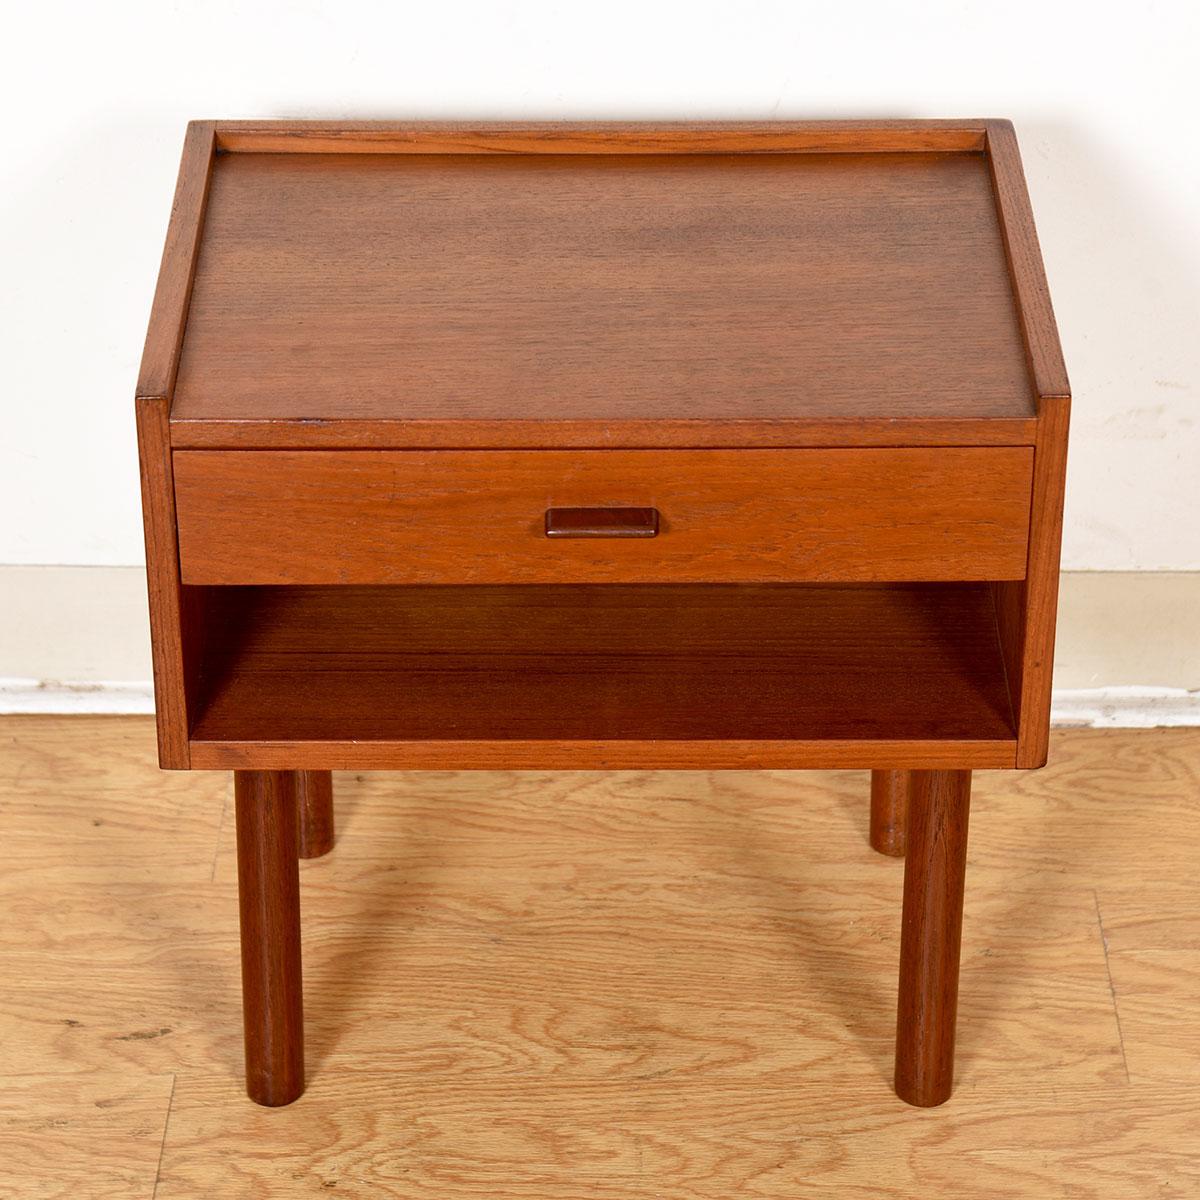 Danish Teak Nightstand / End Table with Finished Backside by Hans Wegner 

Additional information:
Material: Teak

Dimension: W 19? x D 14.5? x H 18.75.